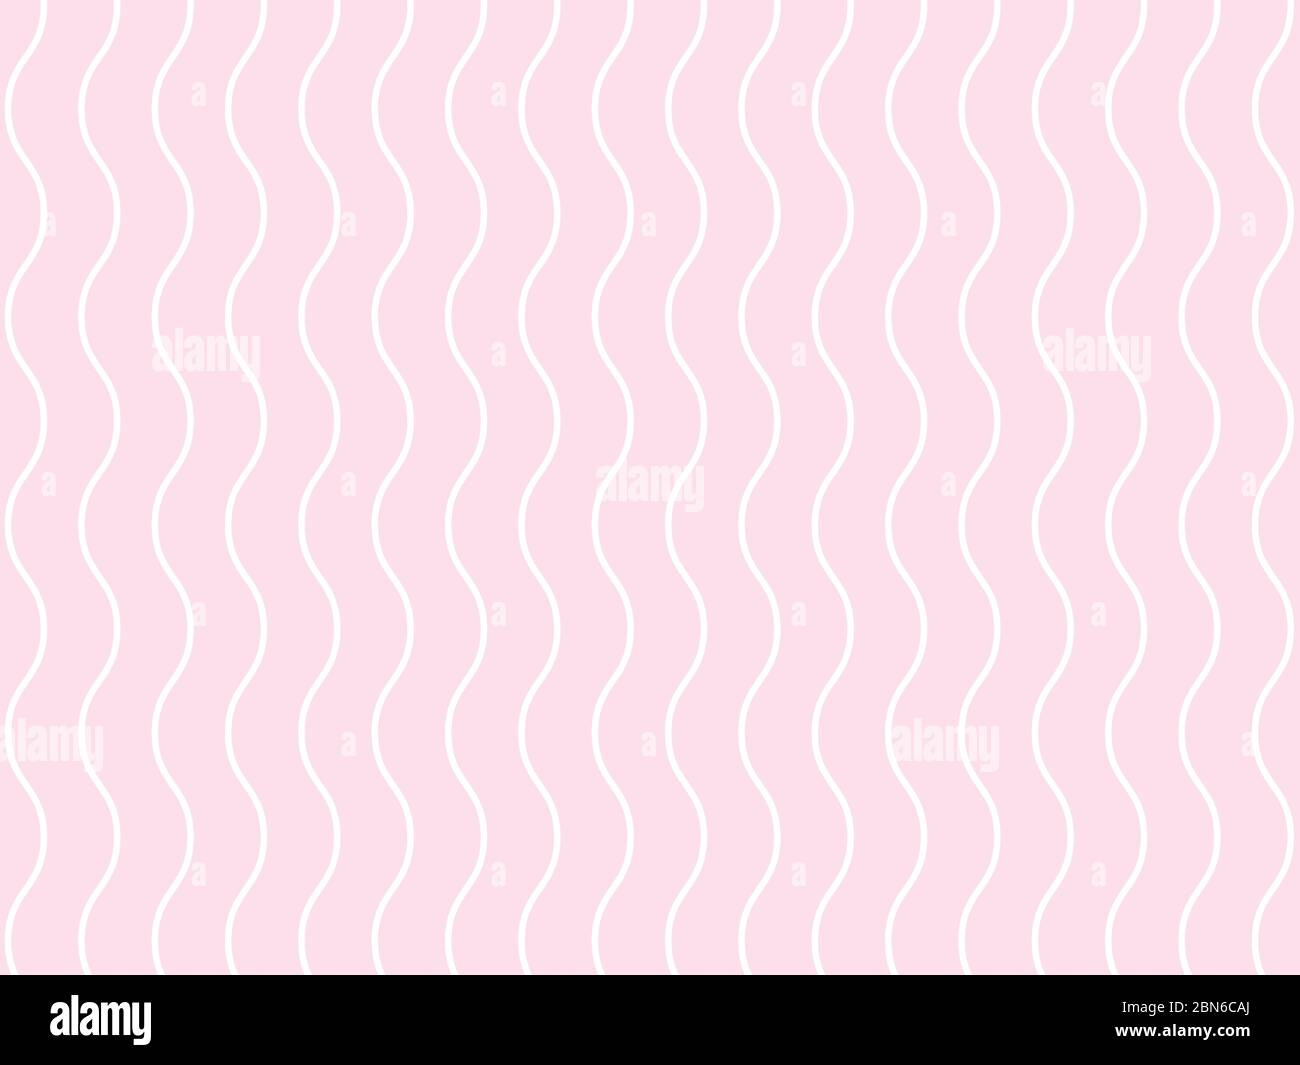 Seamless Zig Zag Wave Lines Graphic Stock Vector (Royalty Free) 615254216